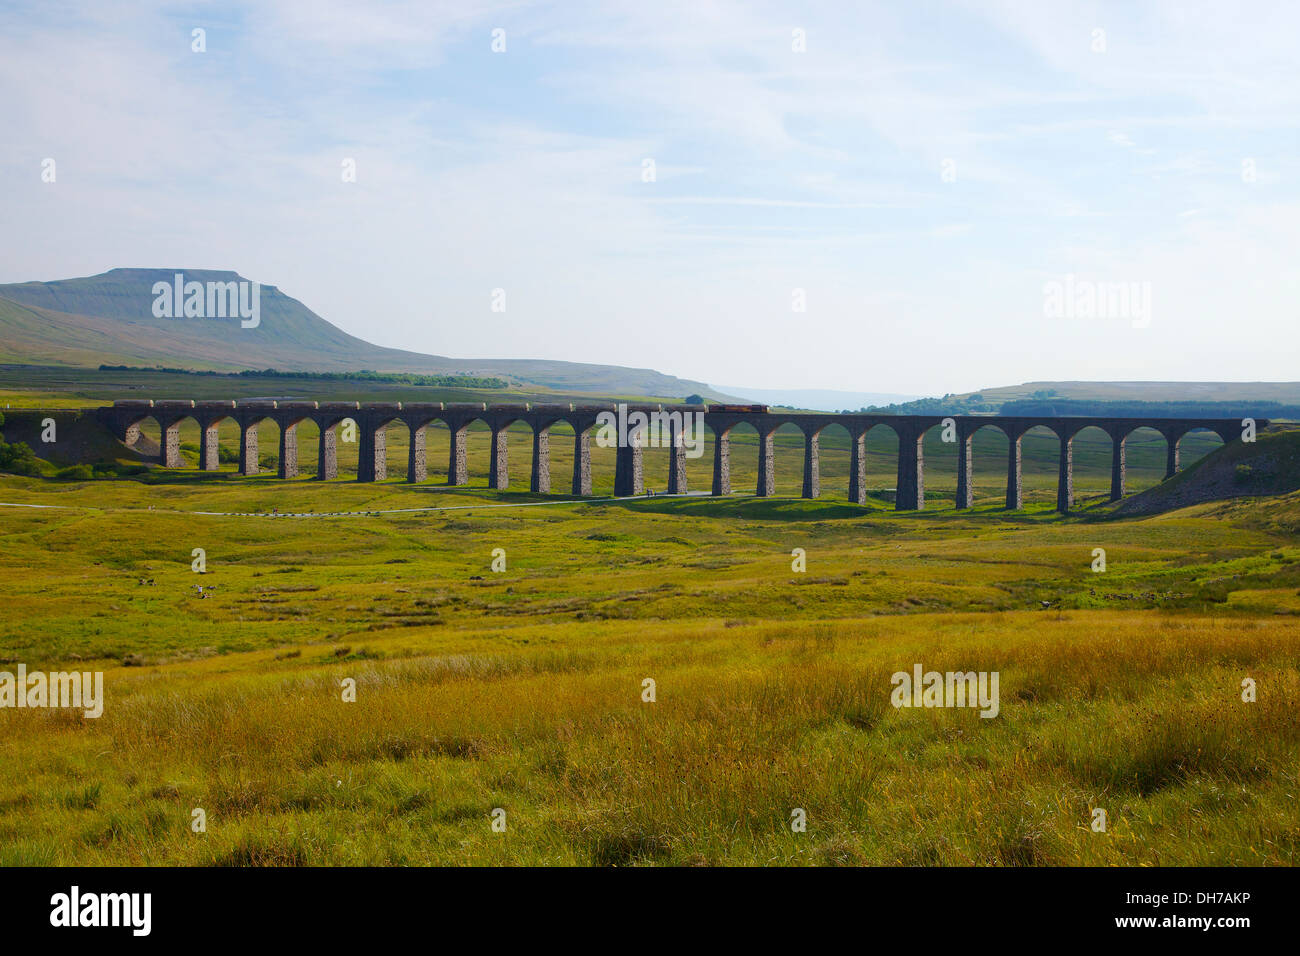 Freight train on Ribblehead Viaduct below Ingleborough mountain Yorkshire Dales National Park North Yorkshire England UK Stock Photo